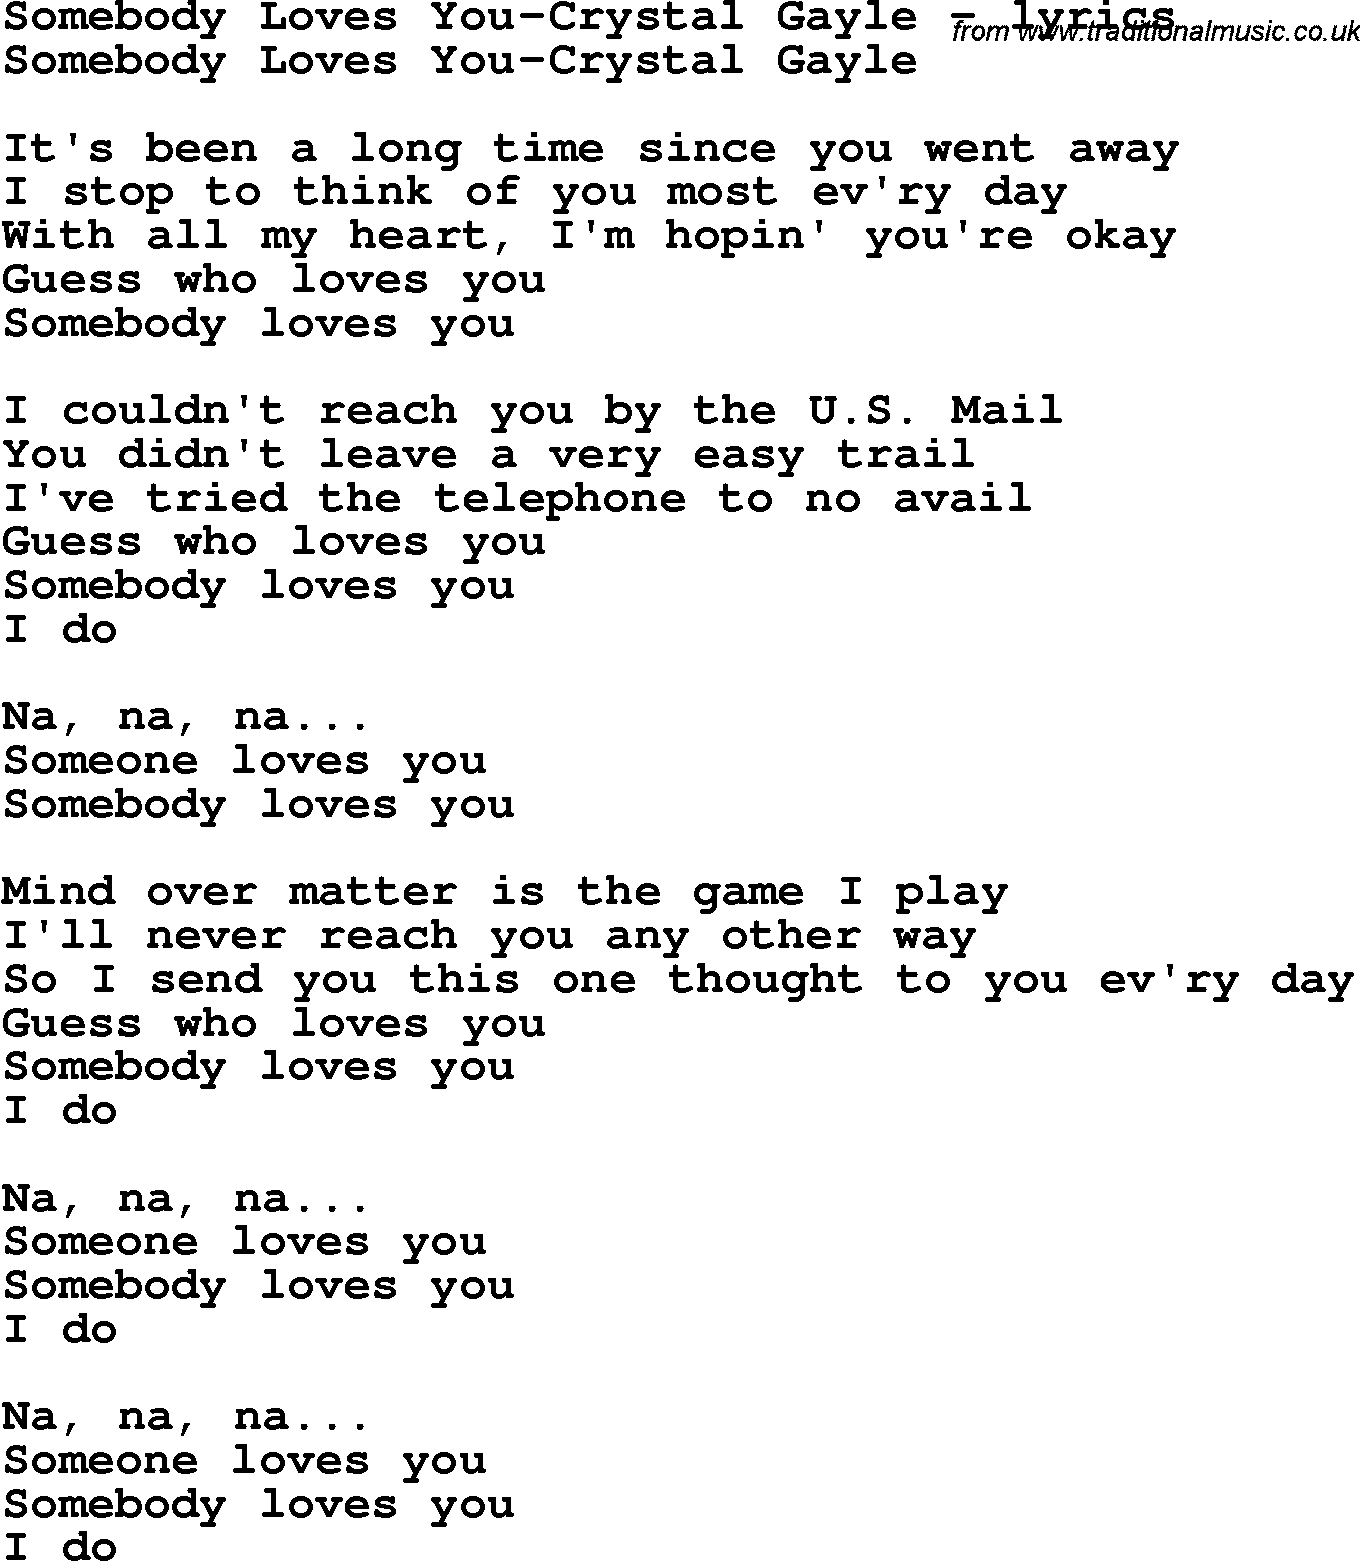 Love Song Lyrics for: Somebody Loves You-Crystal Gayle